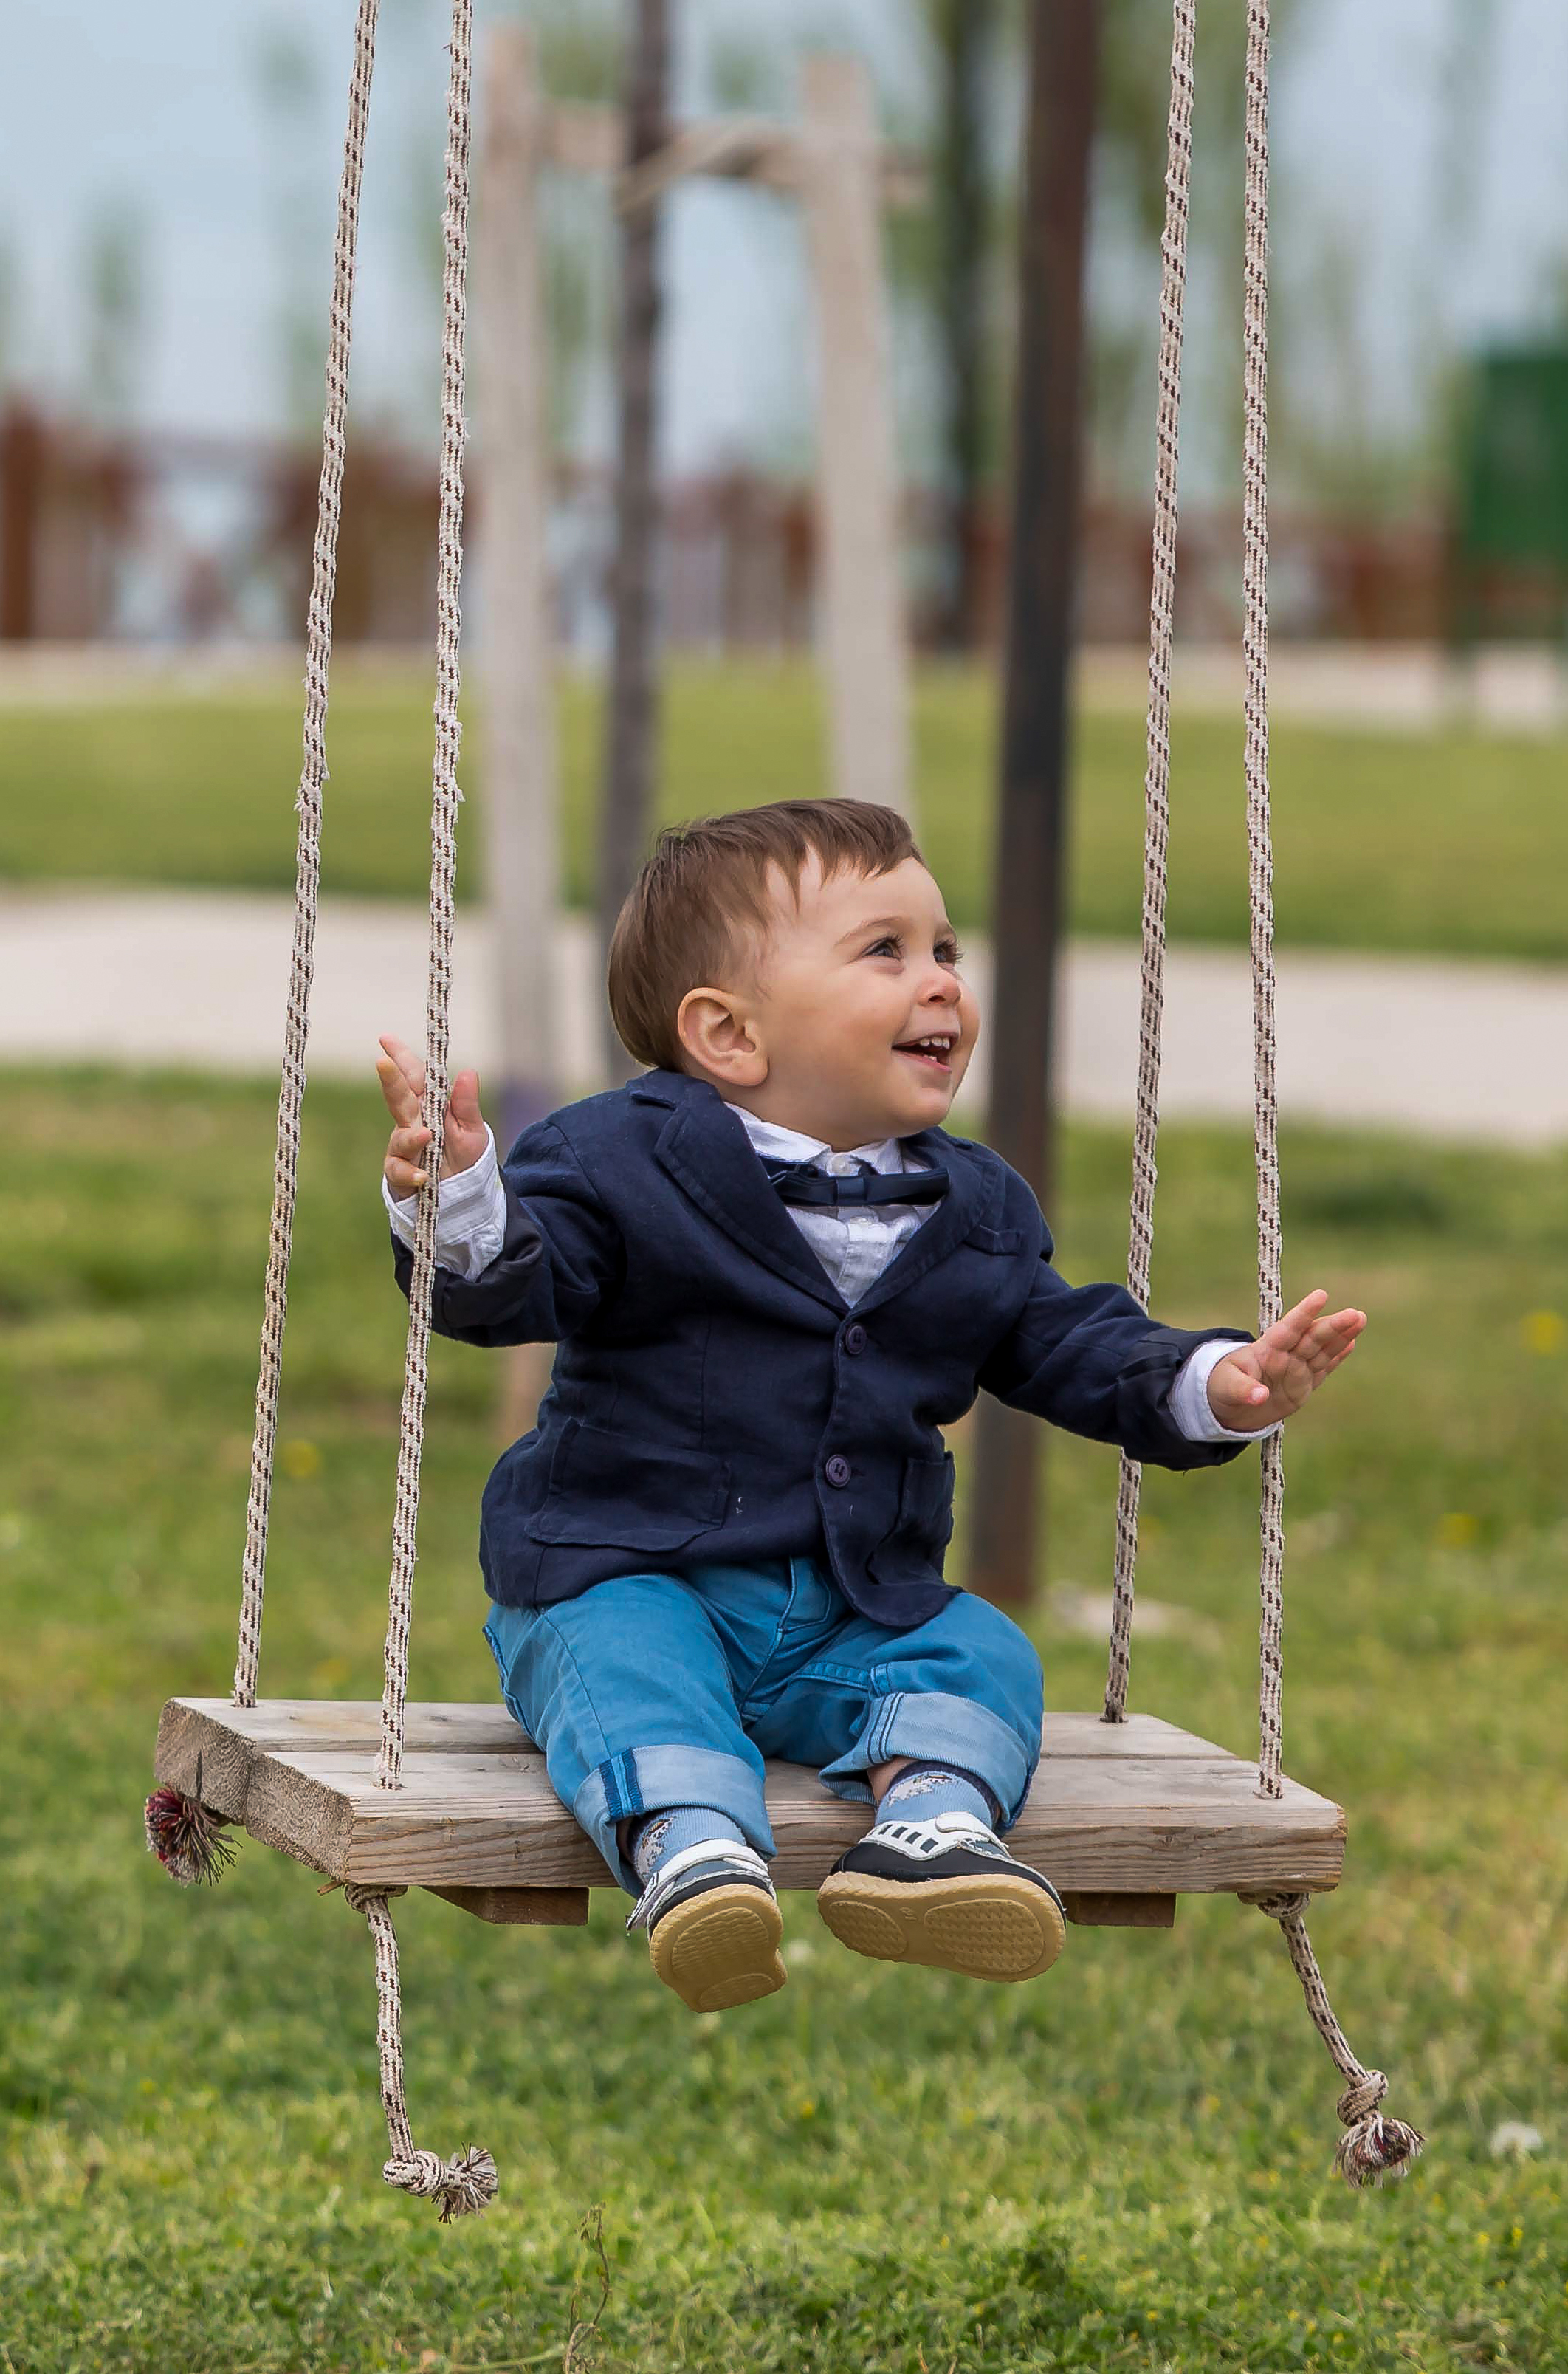 Toddler in a suit on a swing, looking happy